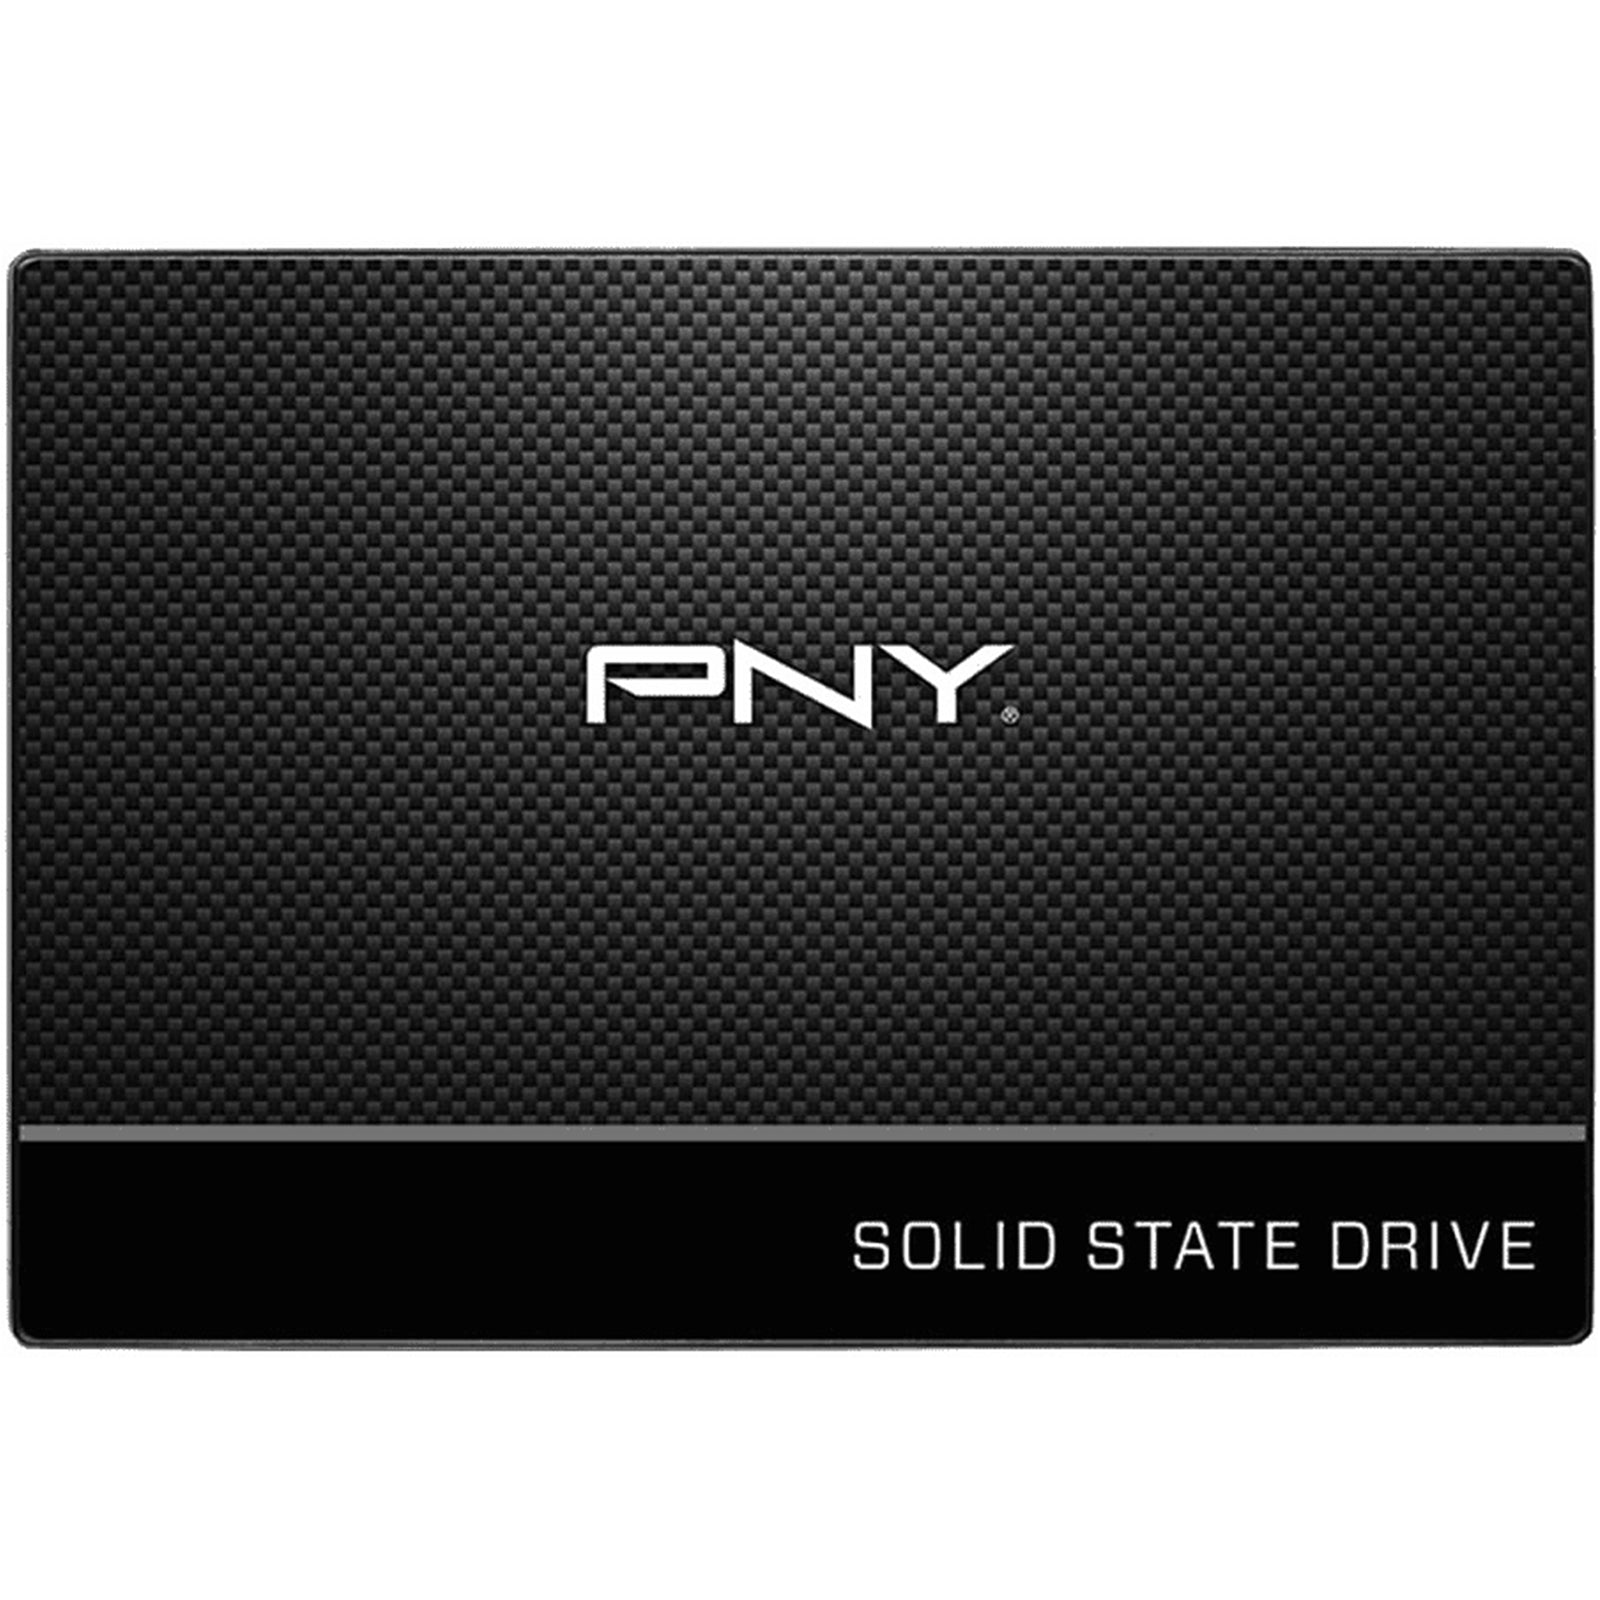 PNY CS900 1TB SATA 3 SSD - High-Speed, Reliable, and Energy-Efficient